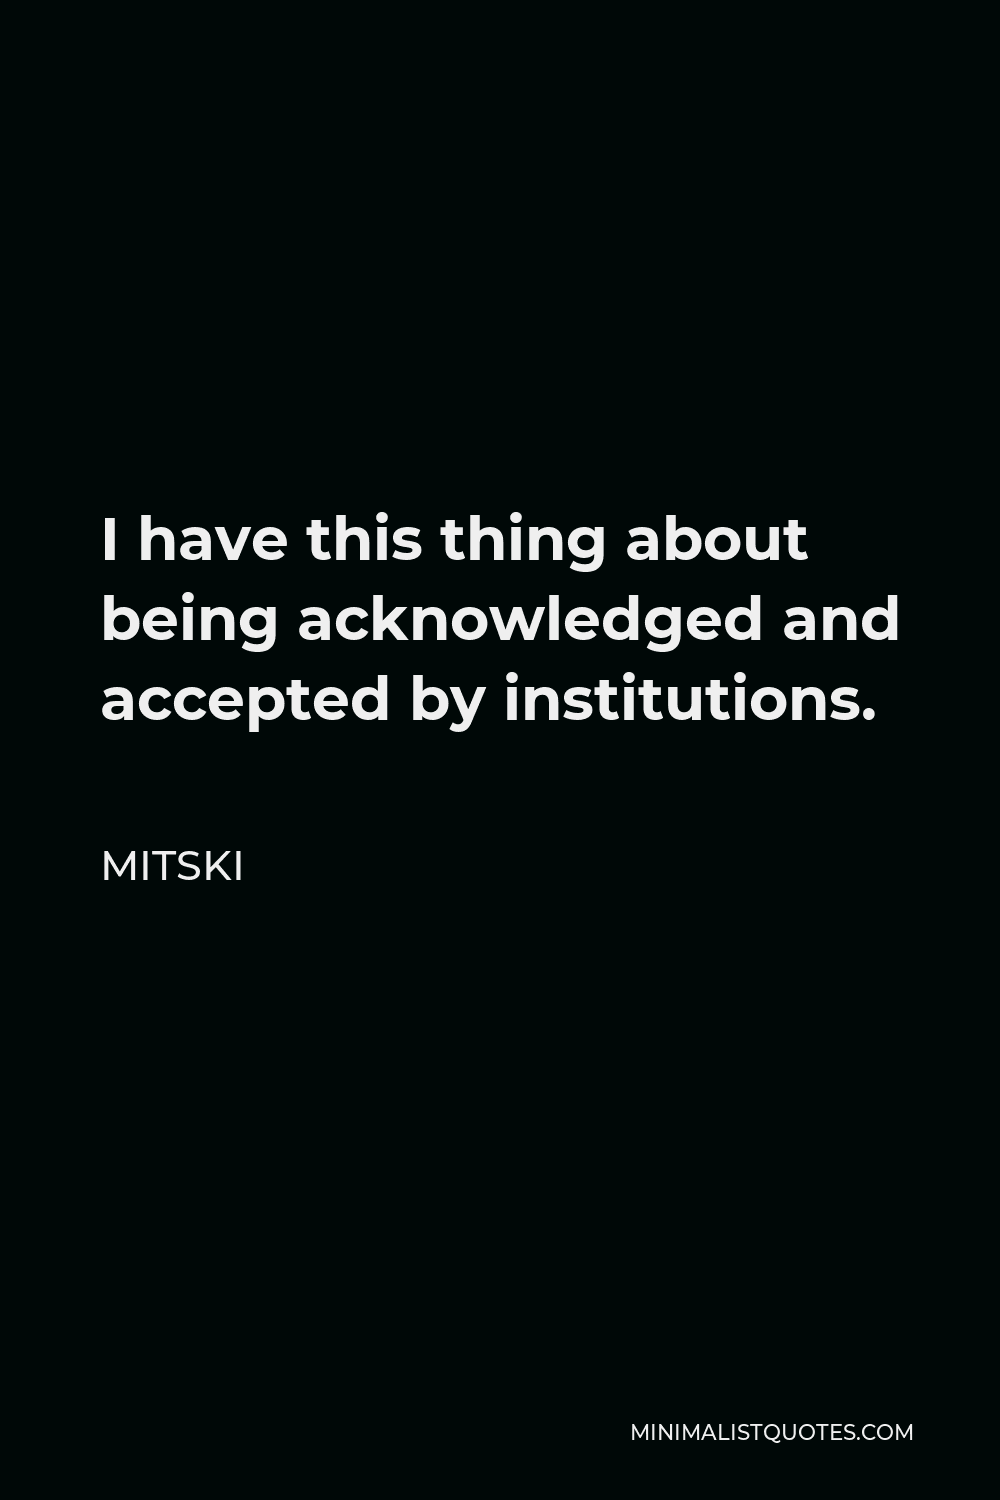 Mitski Quote - I have this thing about being acknowledged and accepted by institutions.